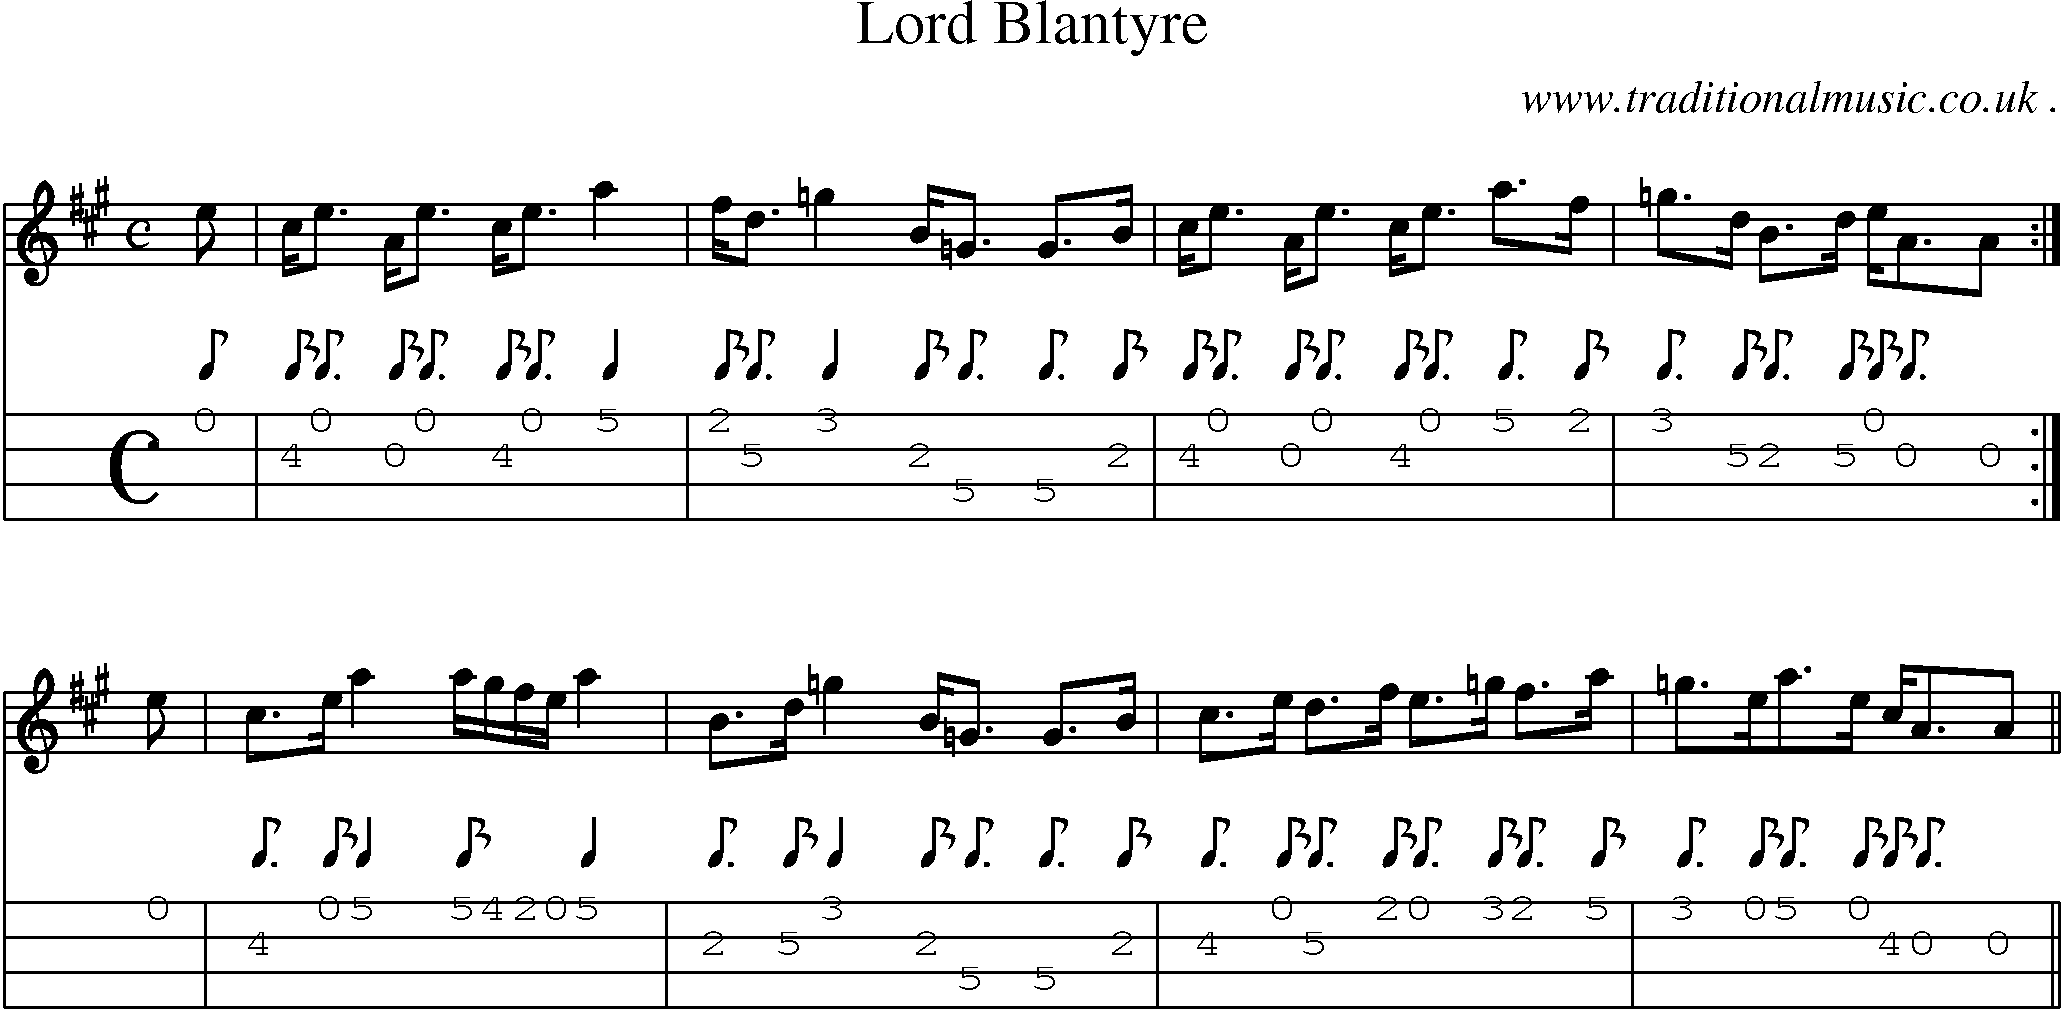 Sheet-music  score, Chords and Mandolin Tabs for Lord Blantyre